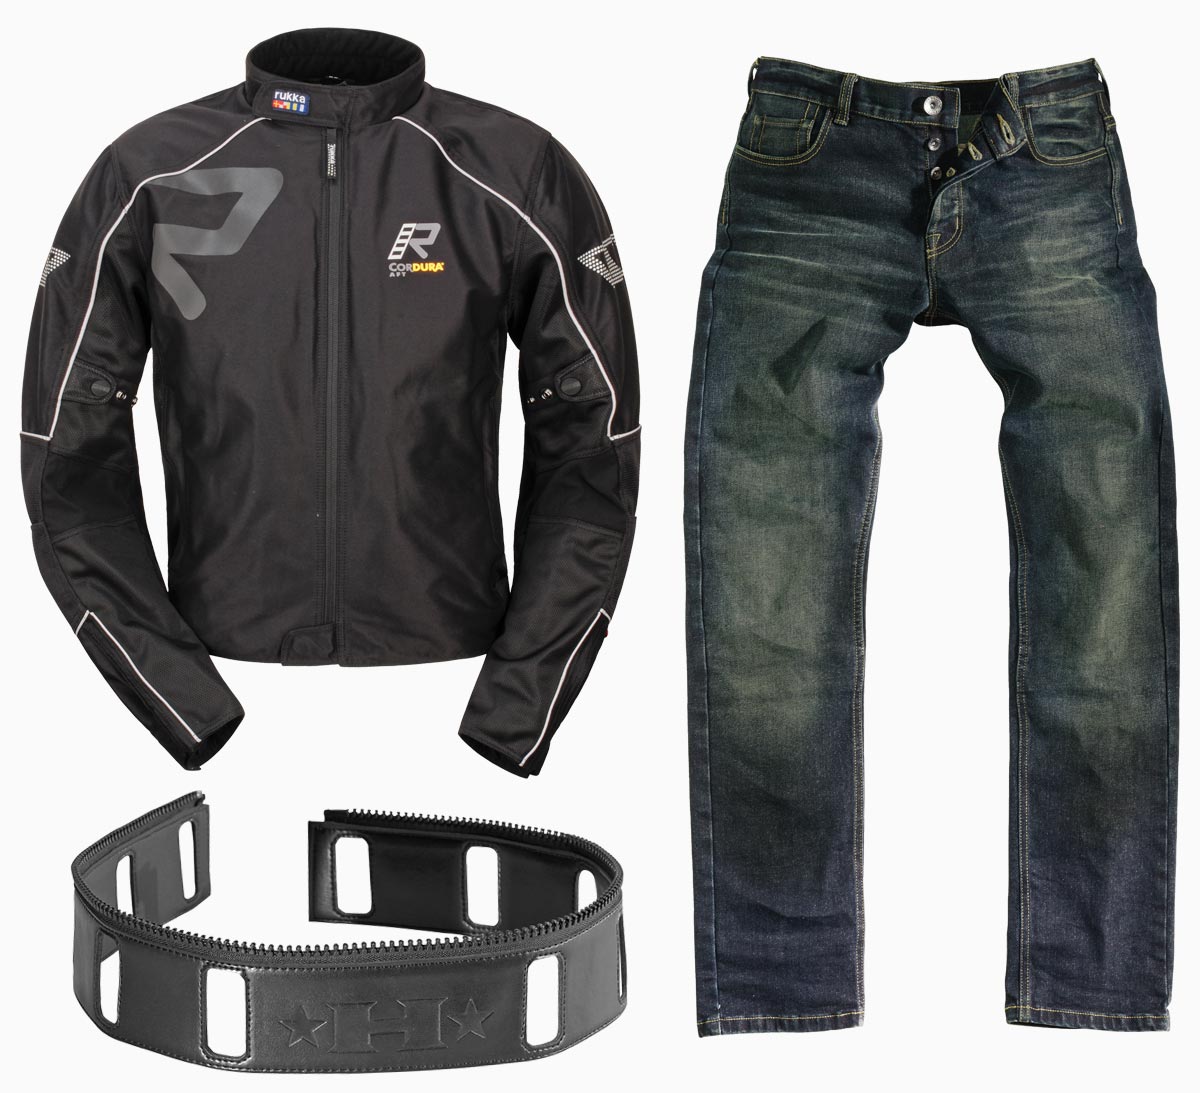 Hot weather motorcycle gear